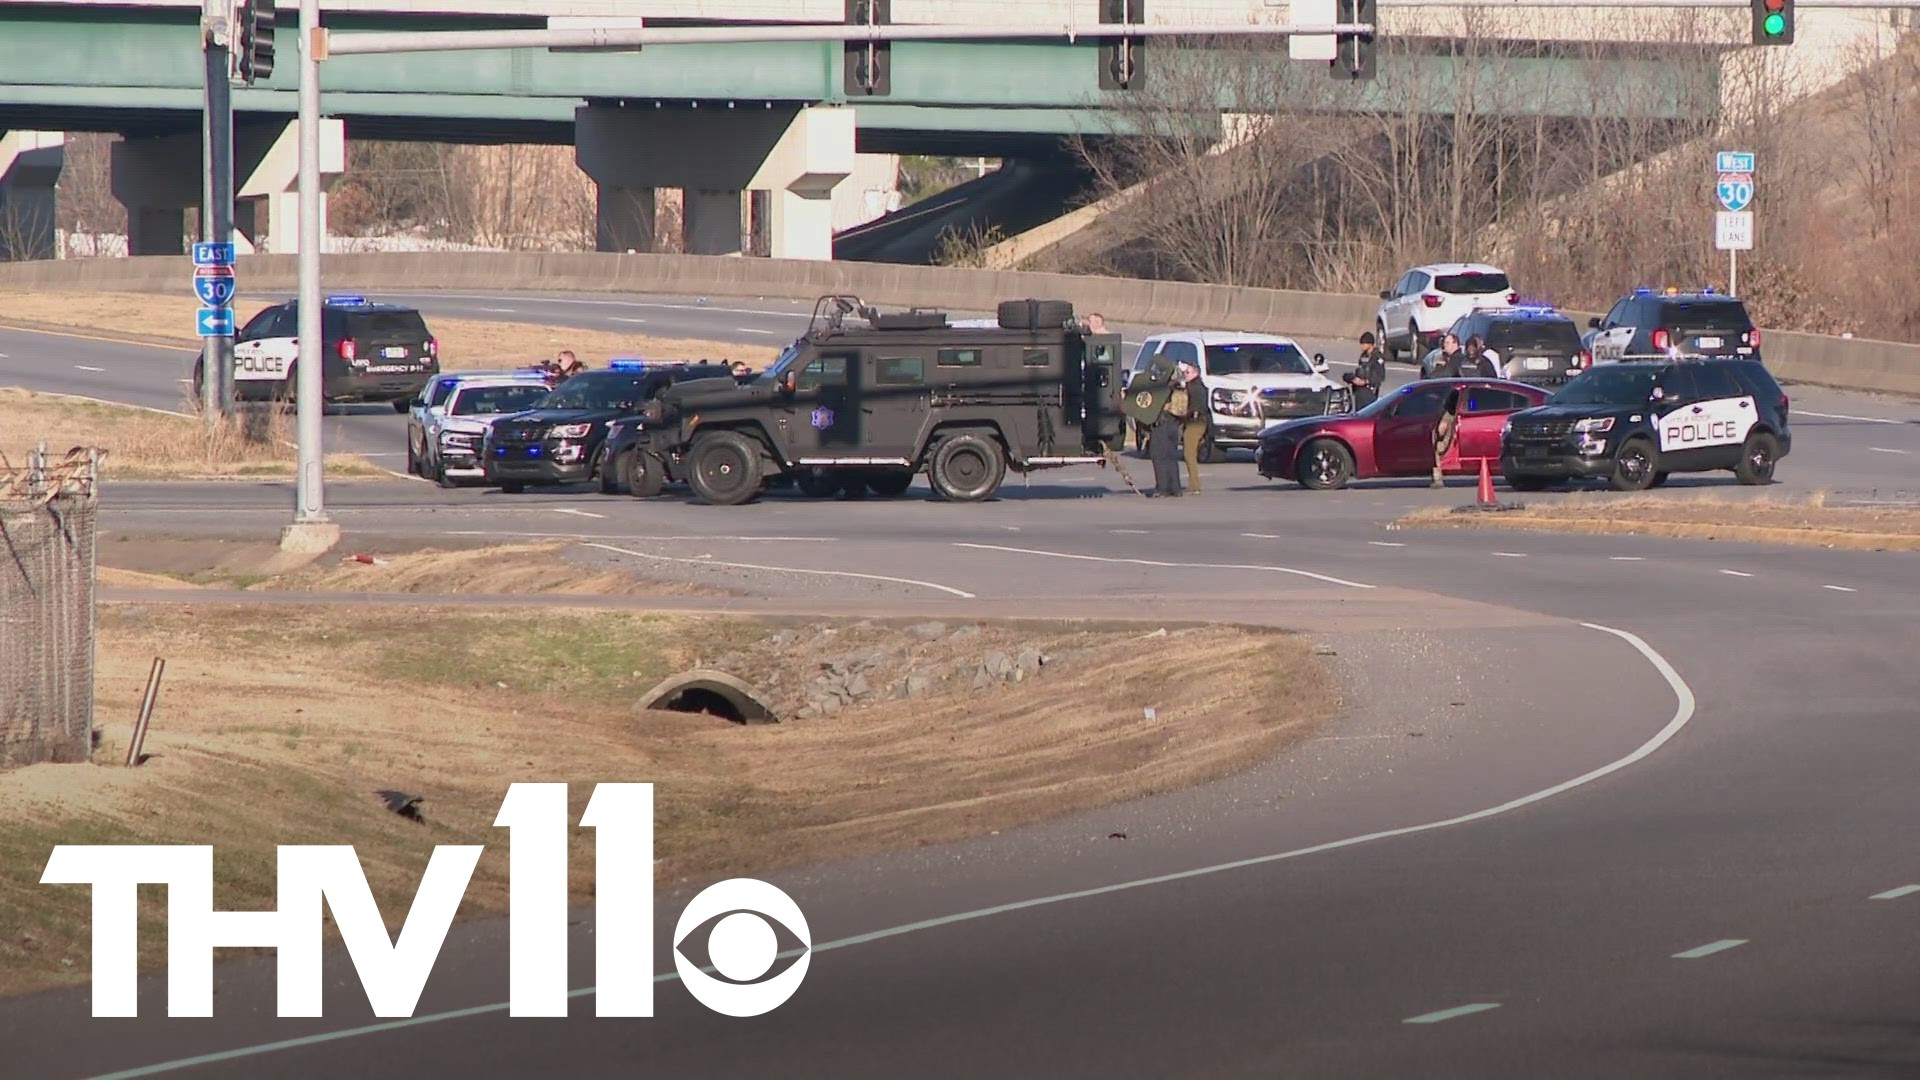 A man wanted by U-S Marshals is dead after leading police on a high-speed chase from Benton to Little Rock.